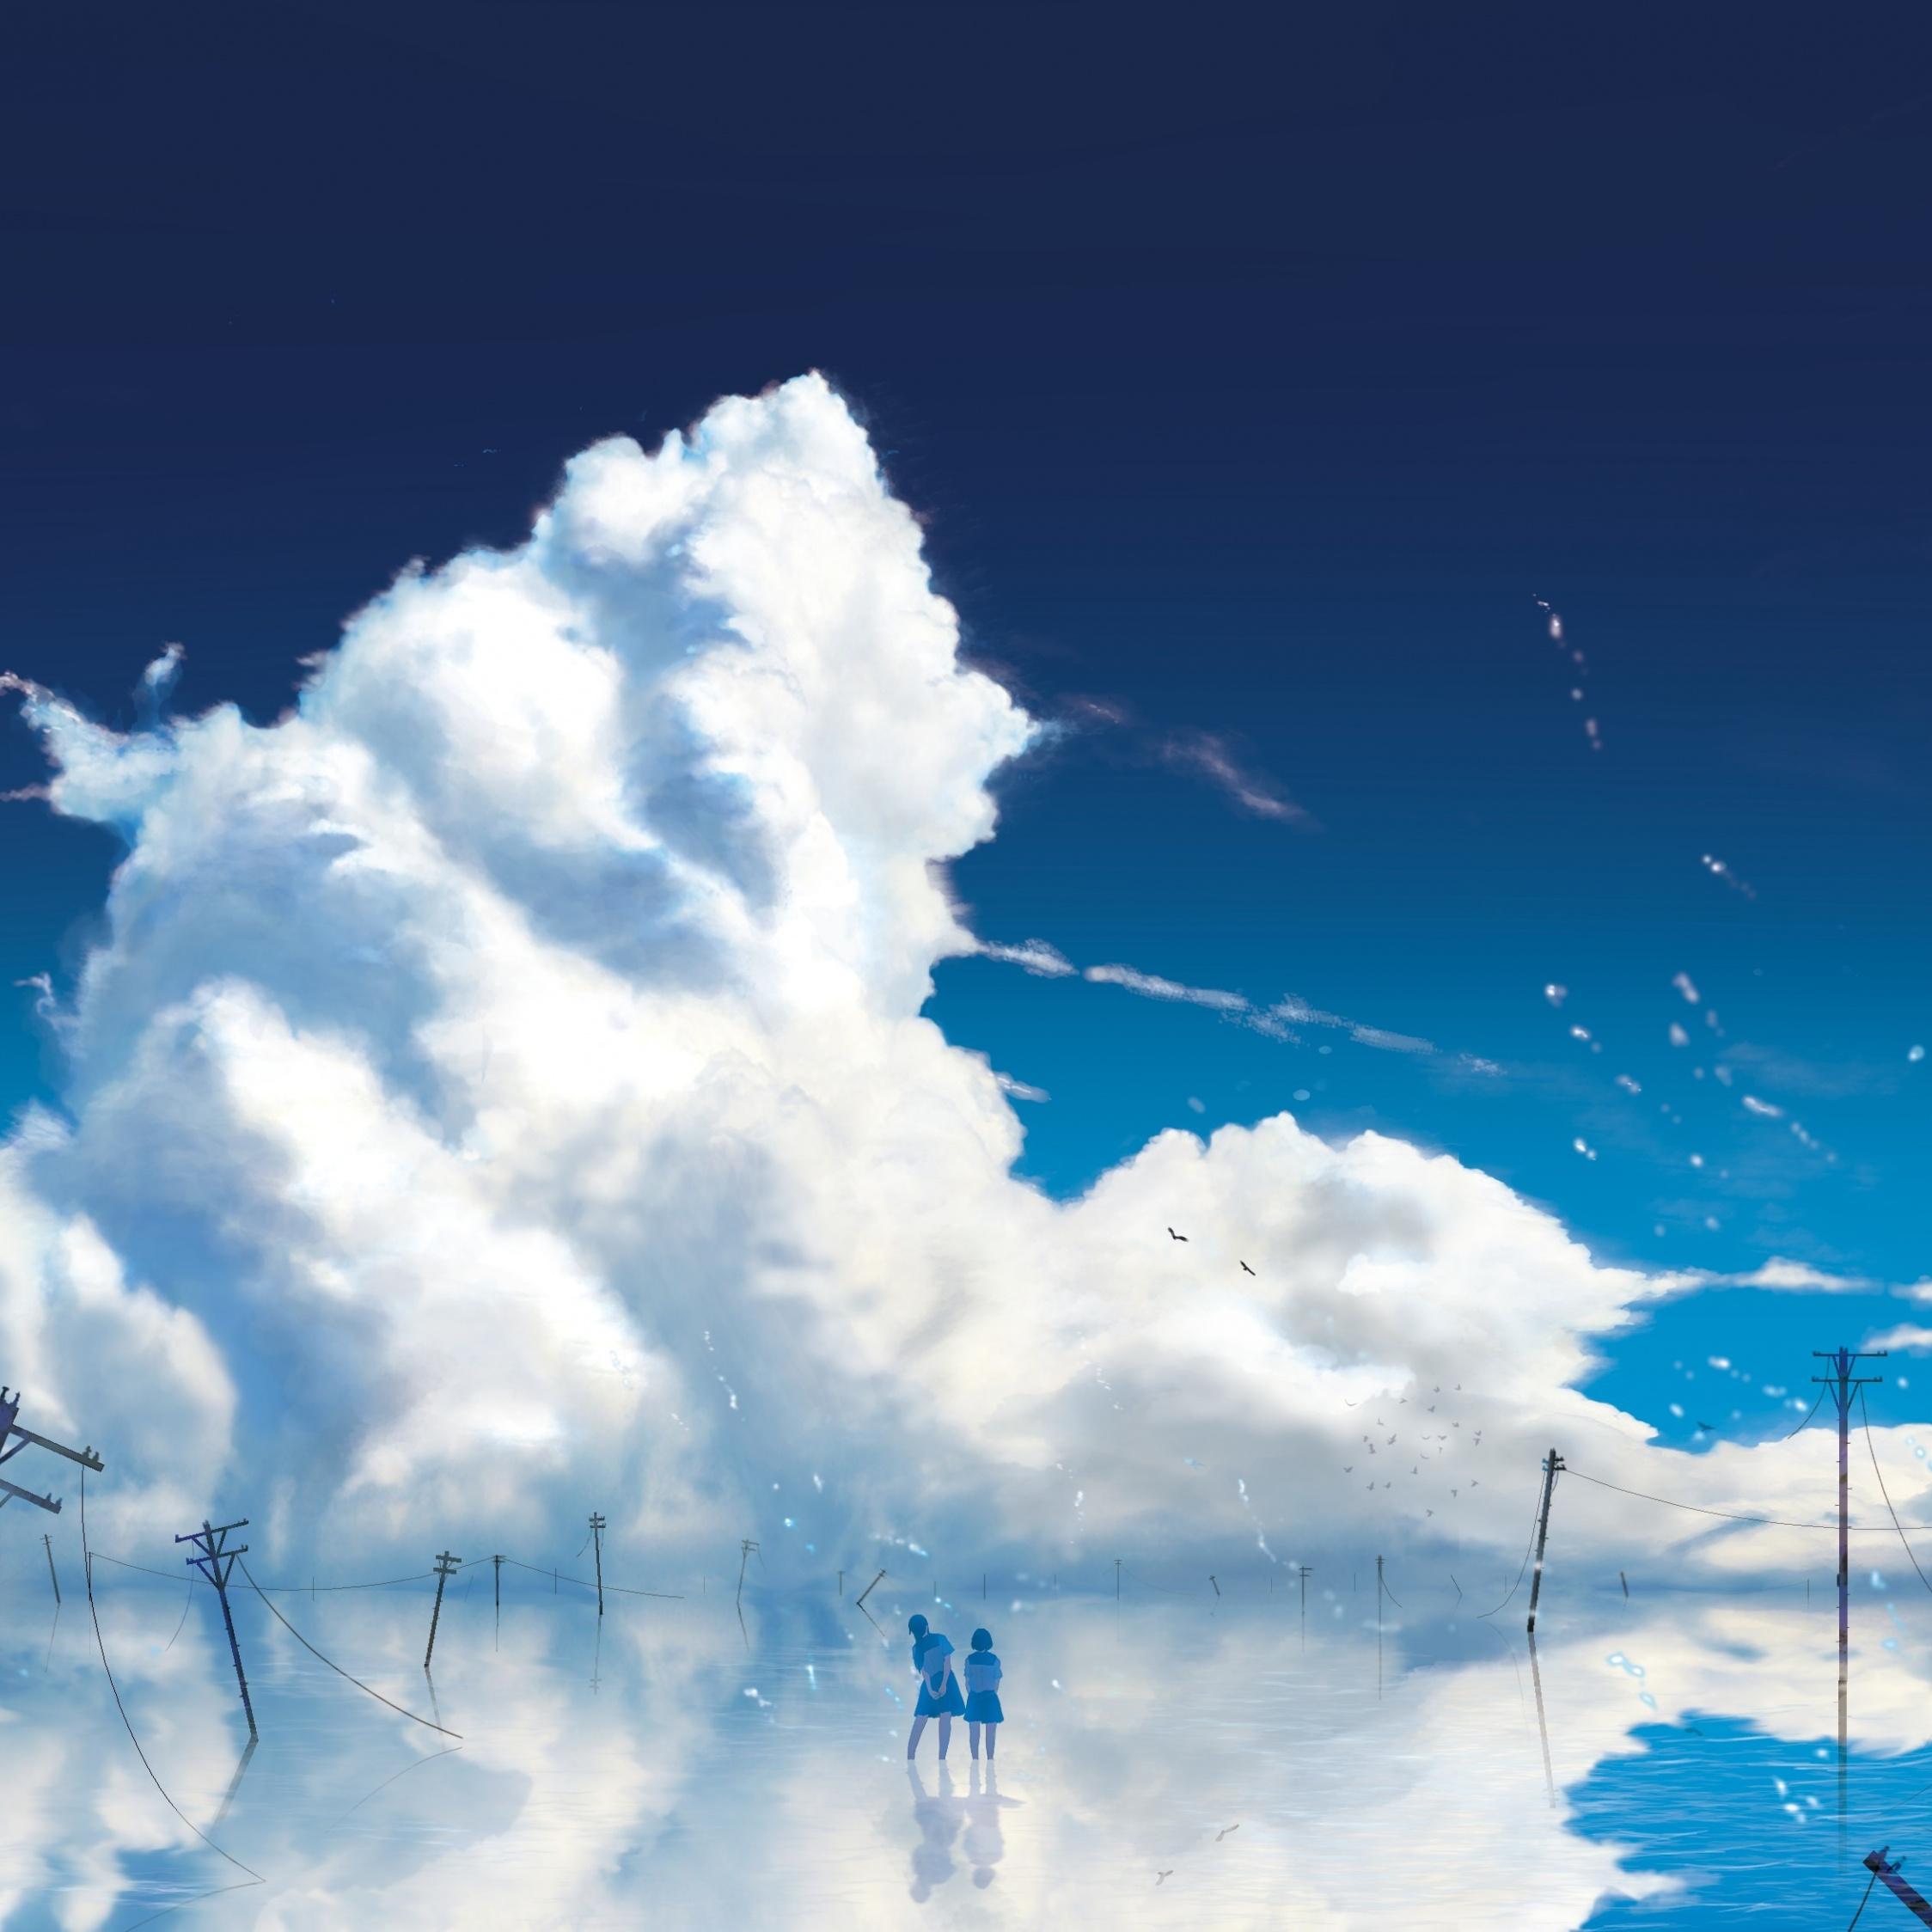 Download wallpapers anime girls, outdoor, clouds, ipad air